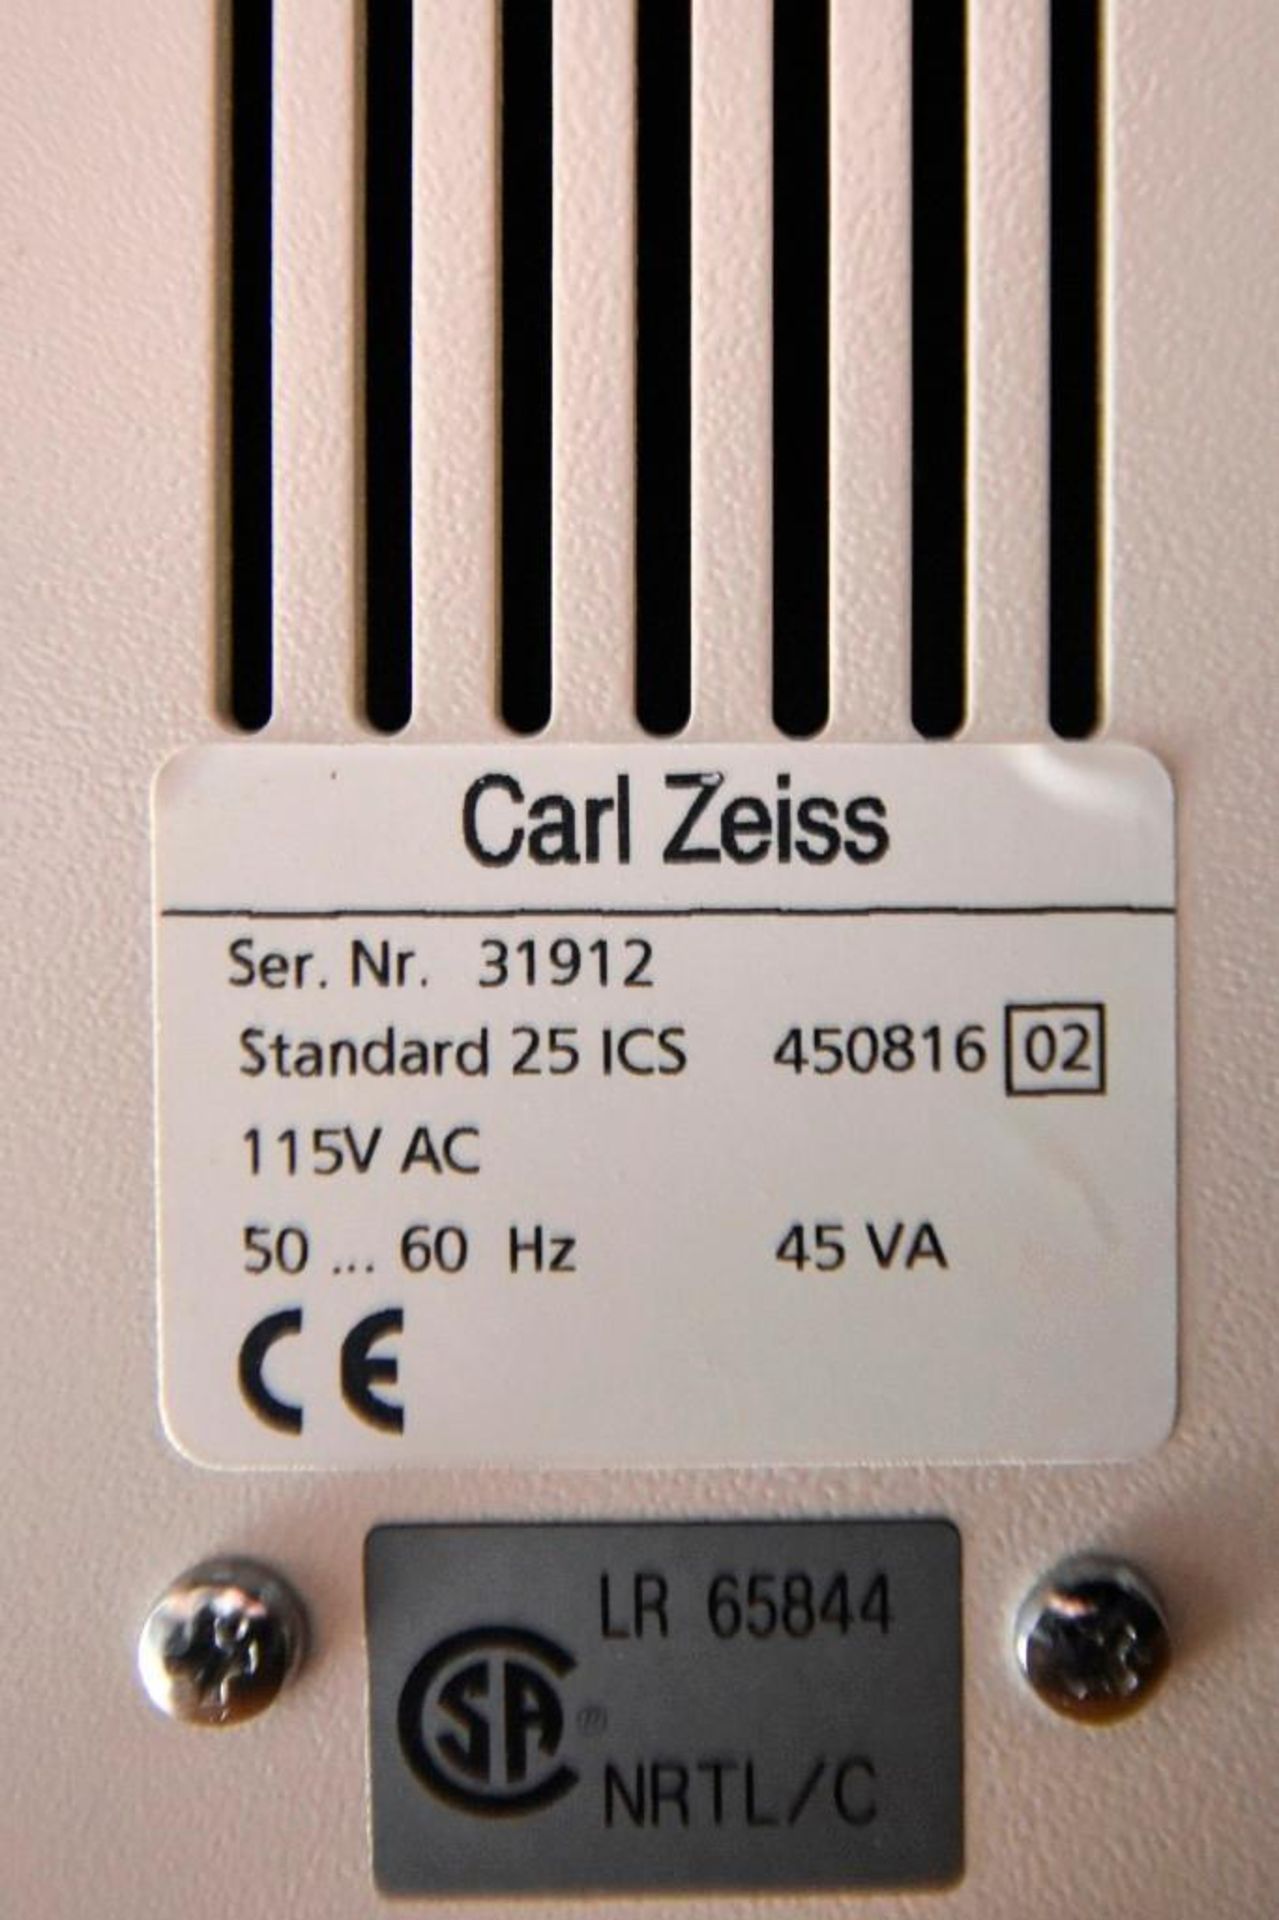 Carl Zeiss Standard 25 ICS Transmitted Light Microscope 450816-02 - Image 5 of 5